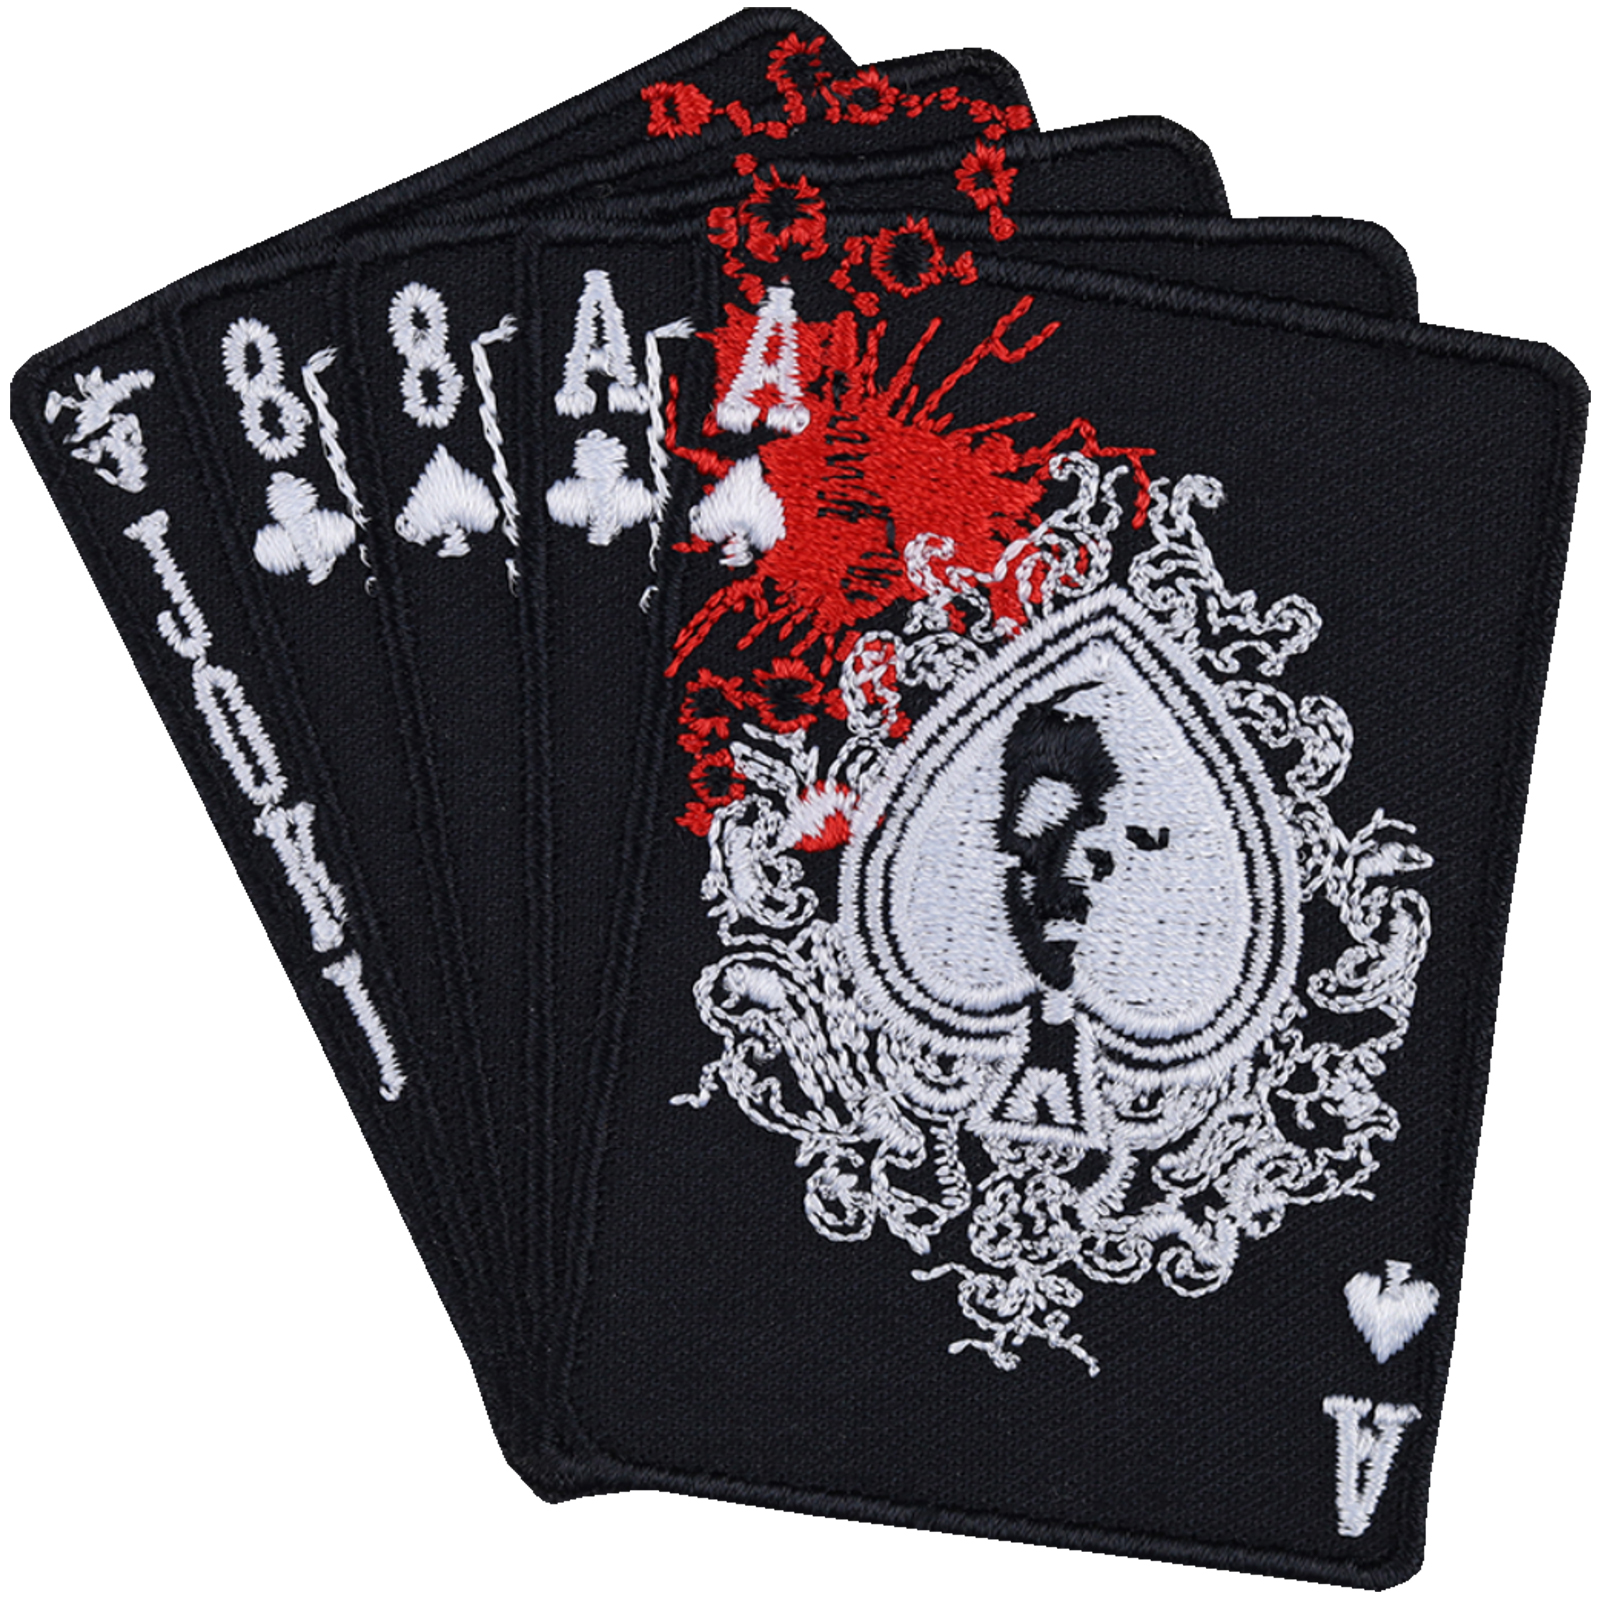 Bloody Cards - Patch